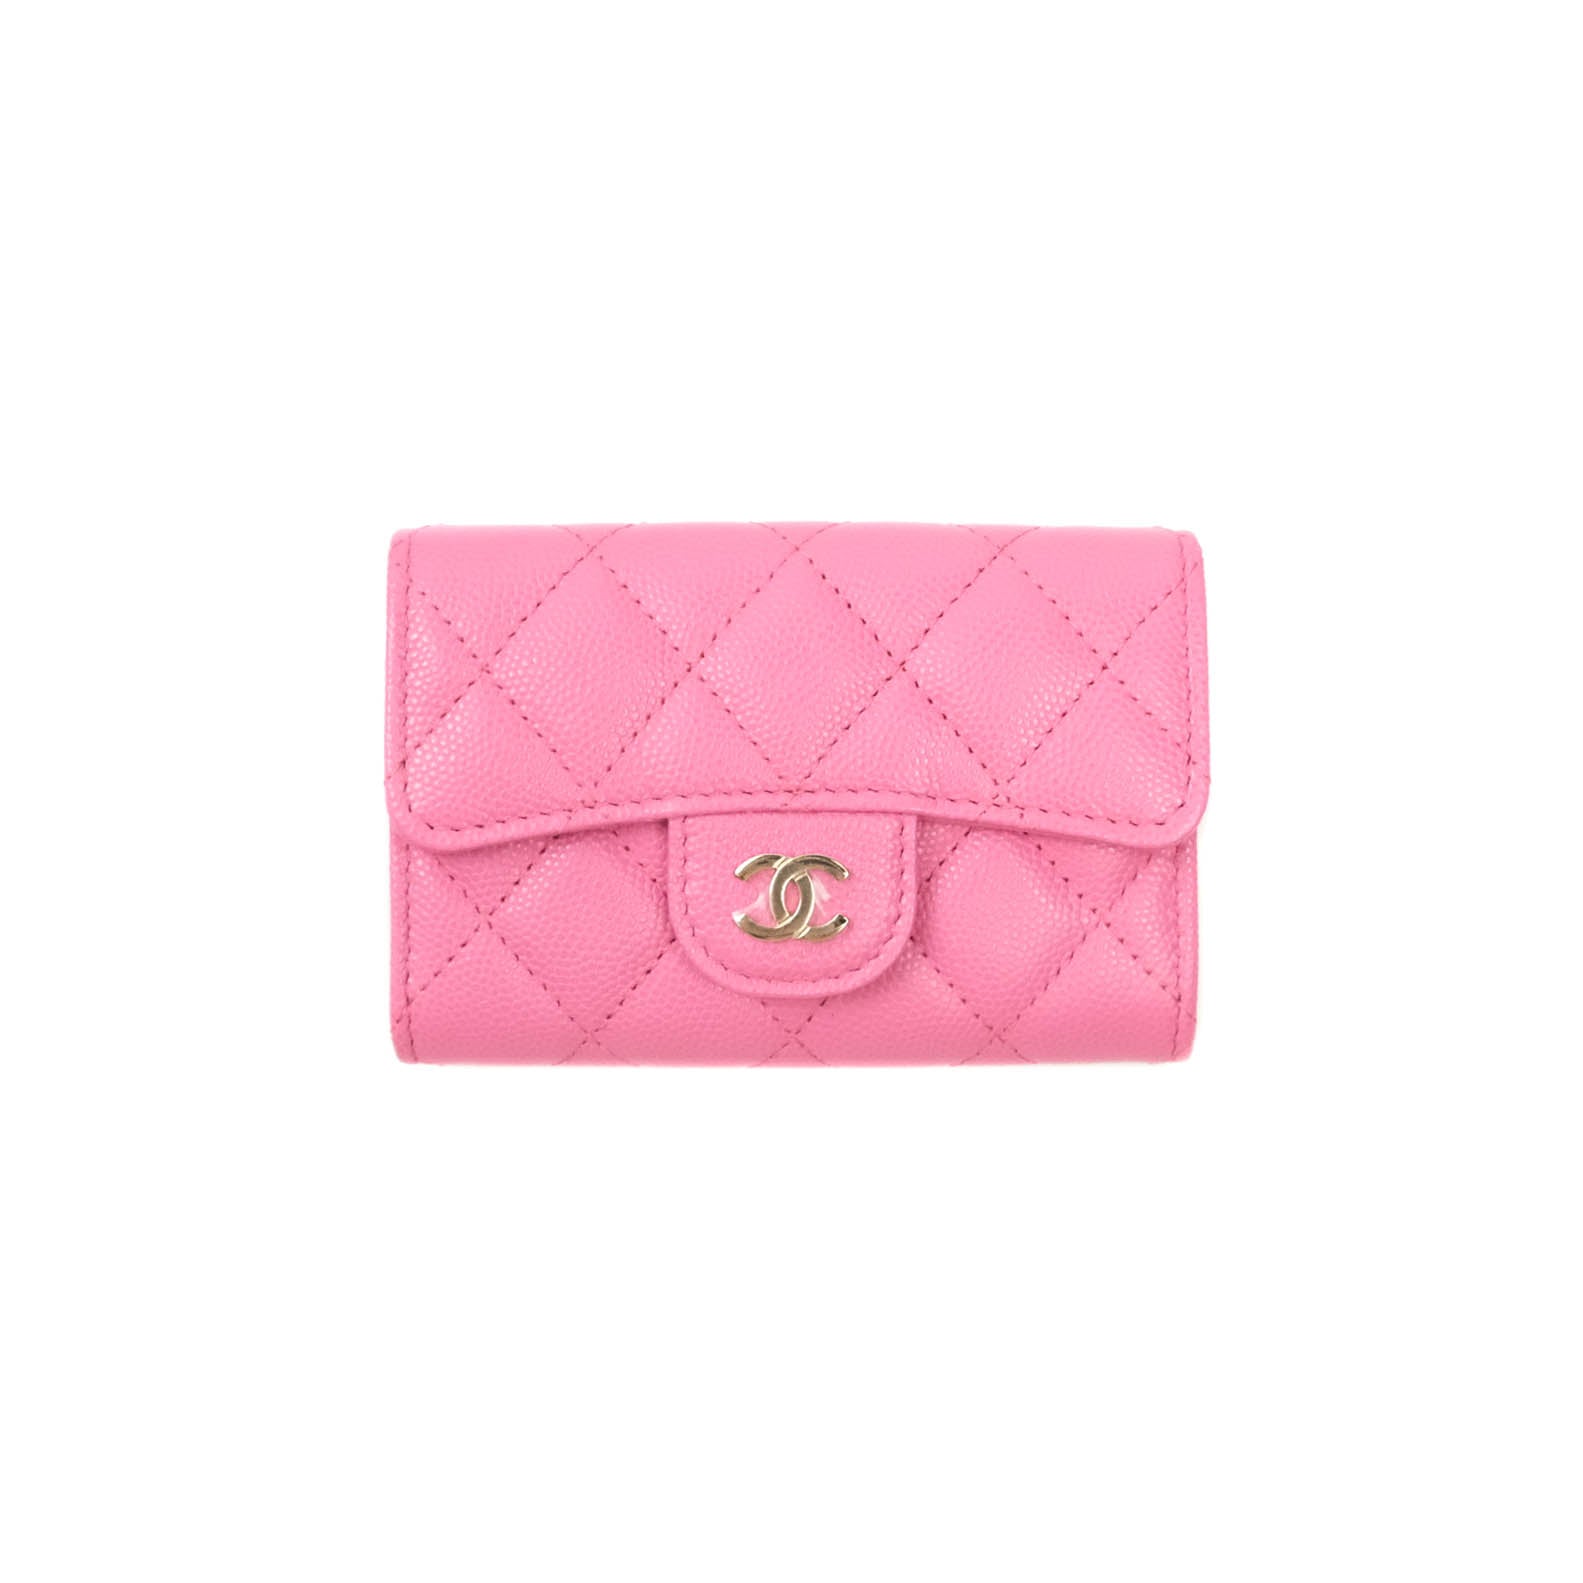 Chanel Caviar Quilted Card Holder Pink Light Gold Hardware – Coco Approved  Studio